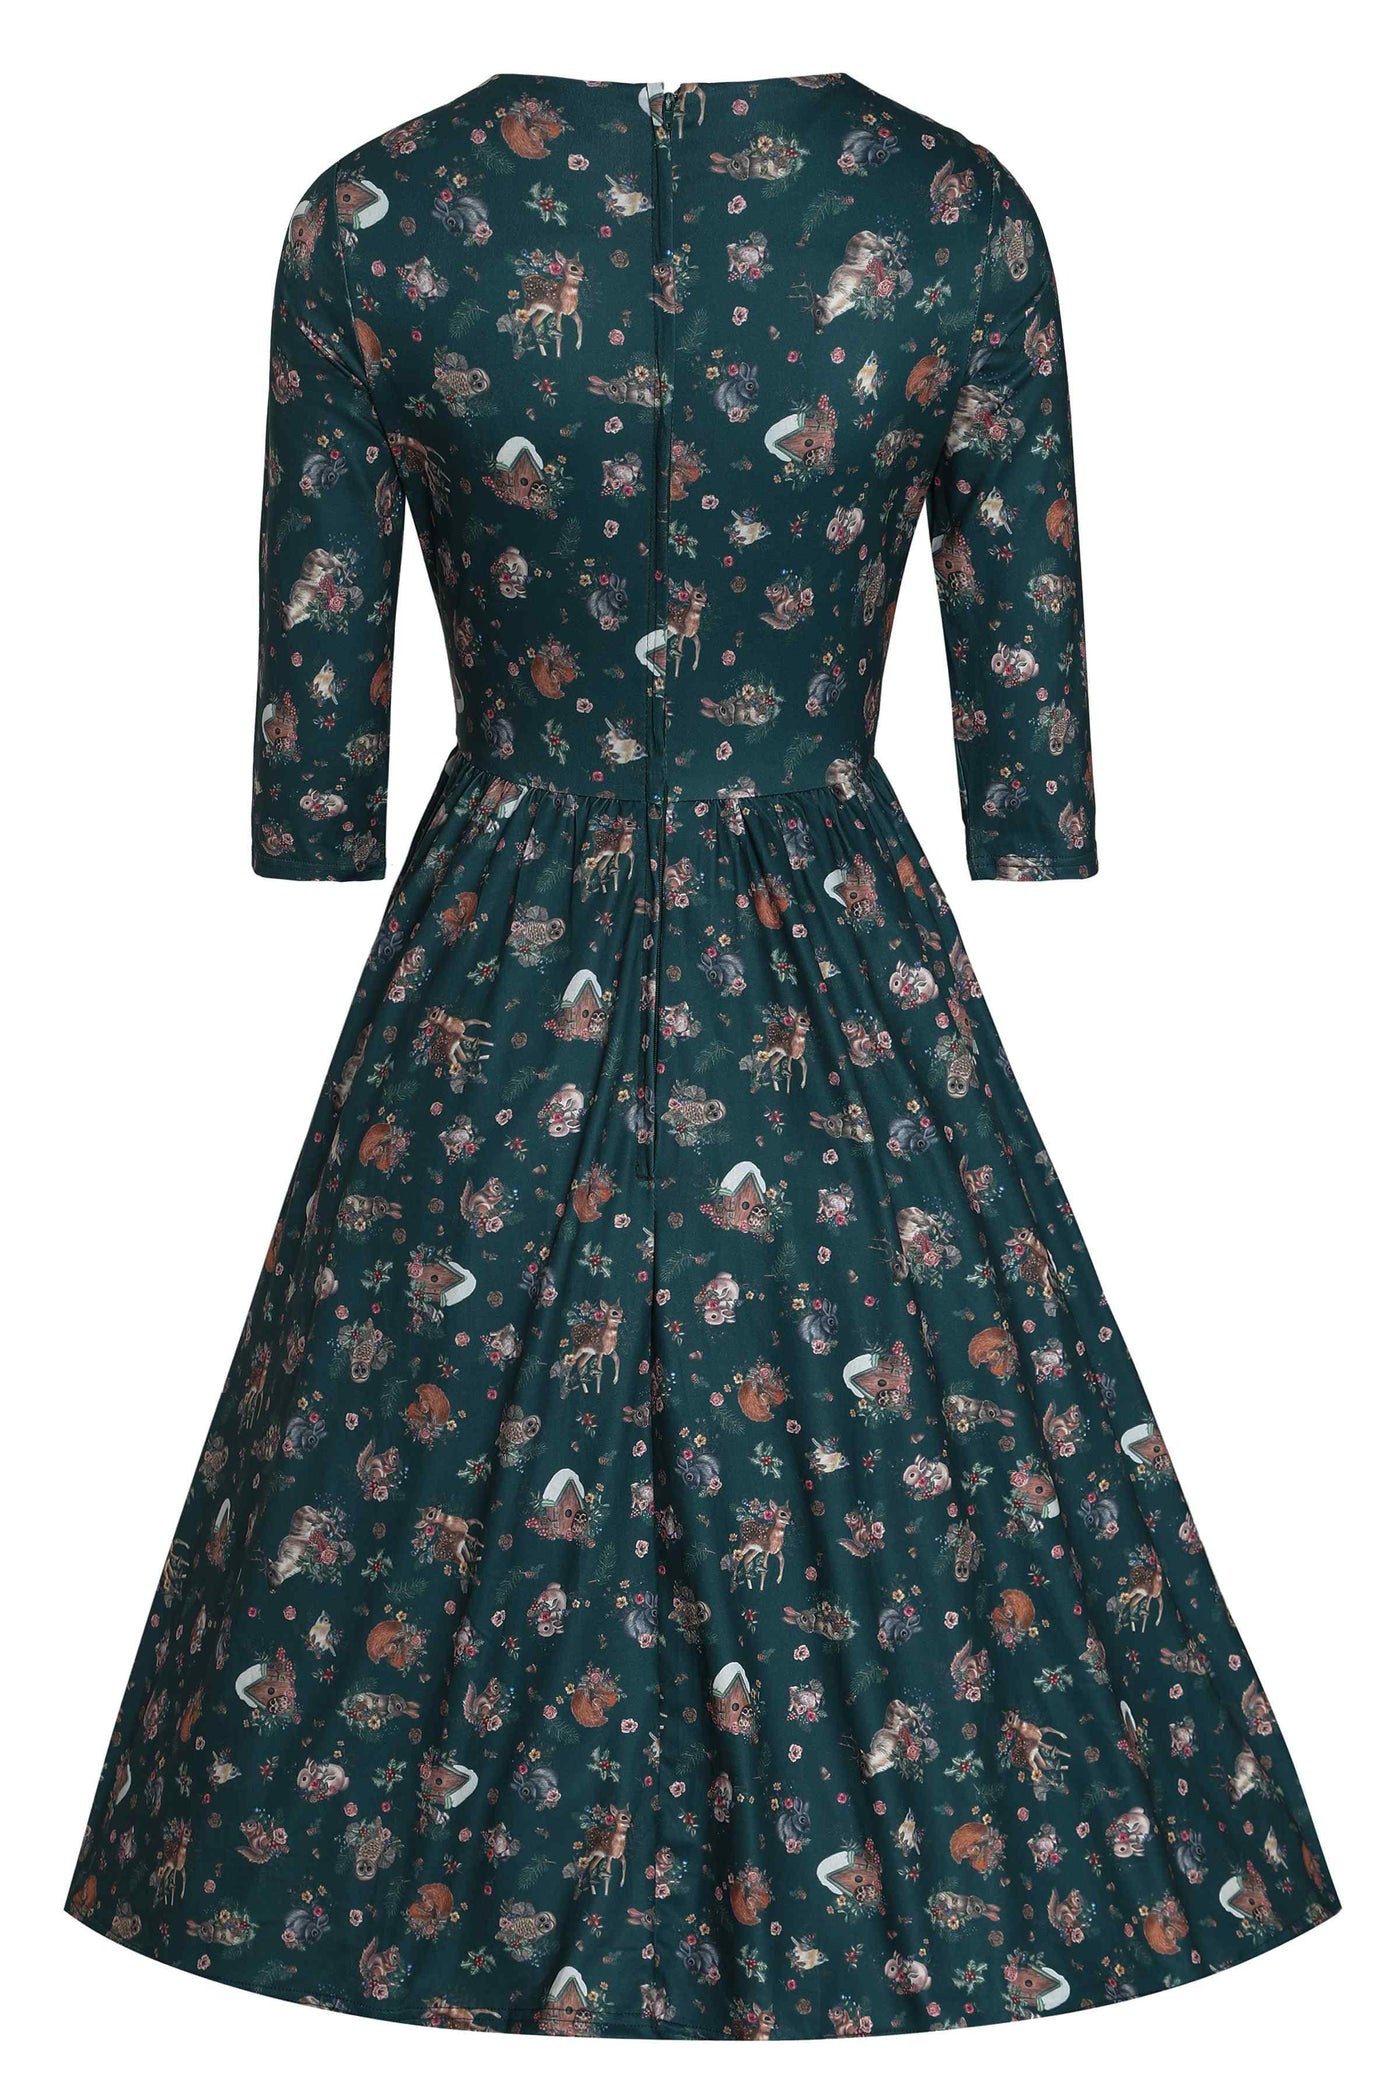 Back view of Woodland Deer and Owl Dress in Green